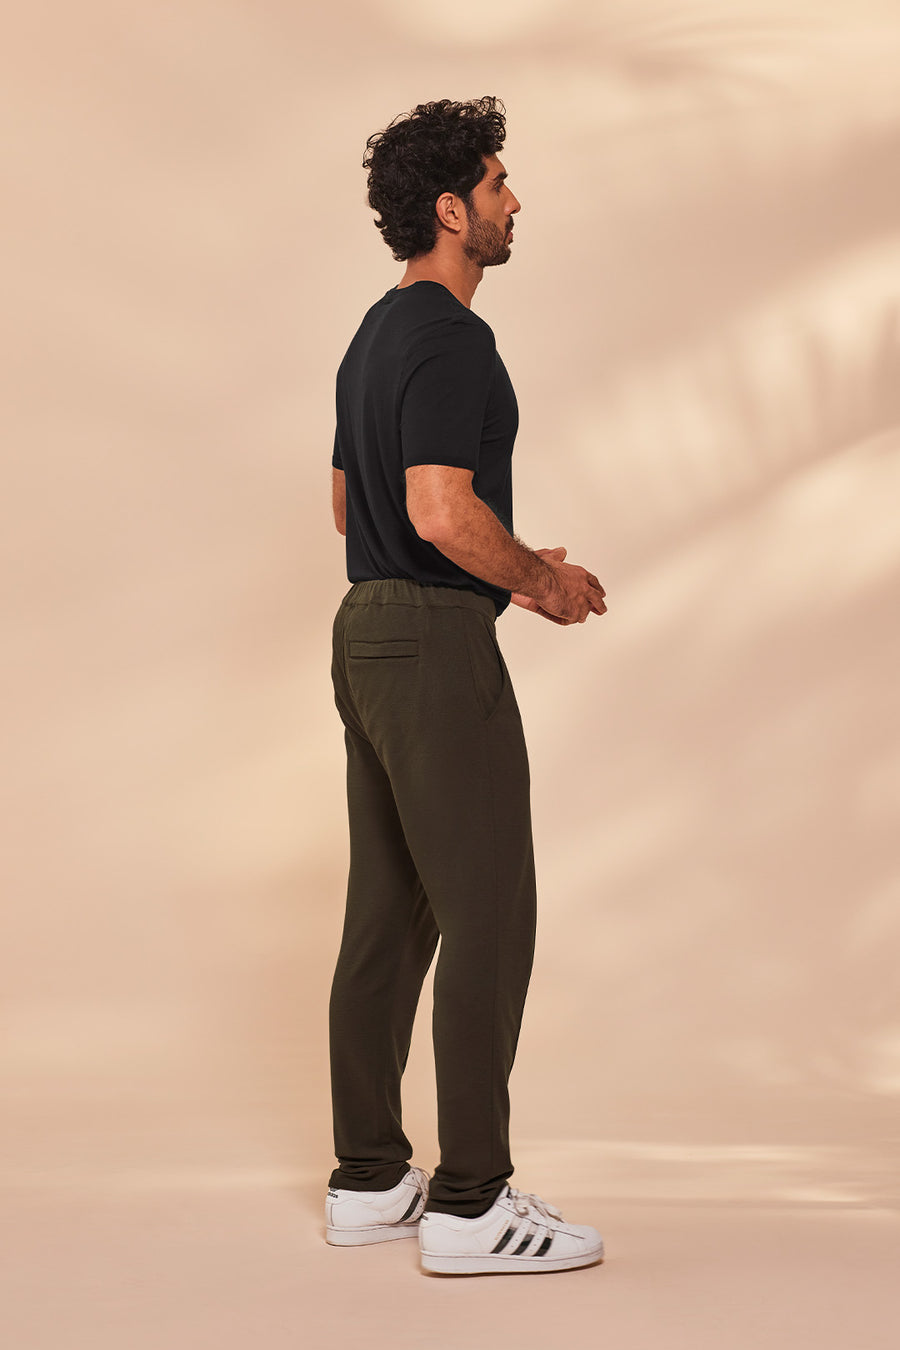 In & Out Hybrid Pant Green